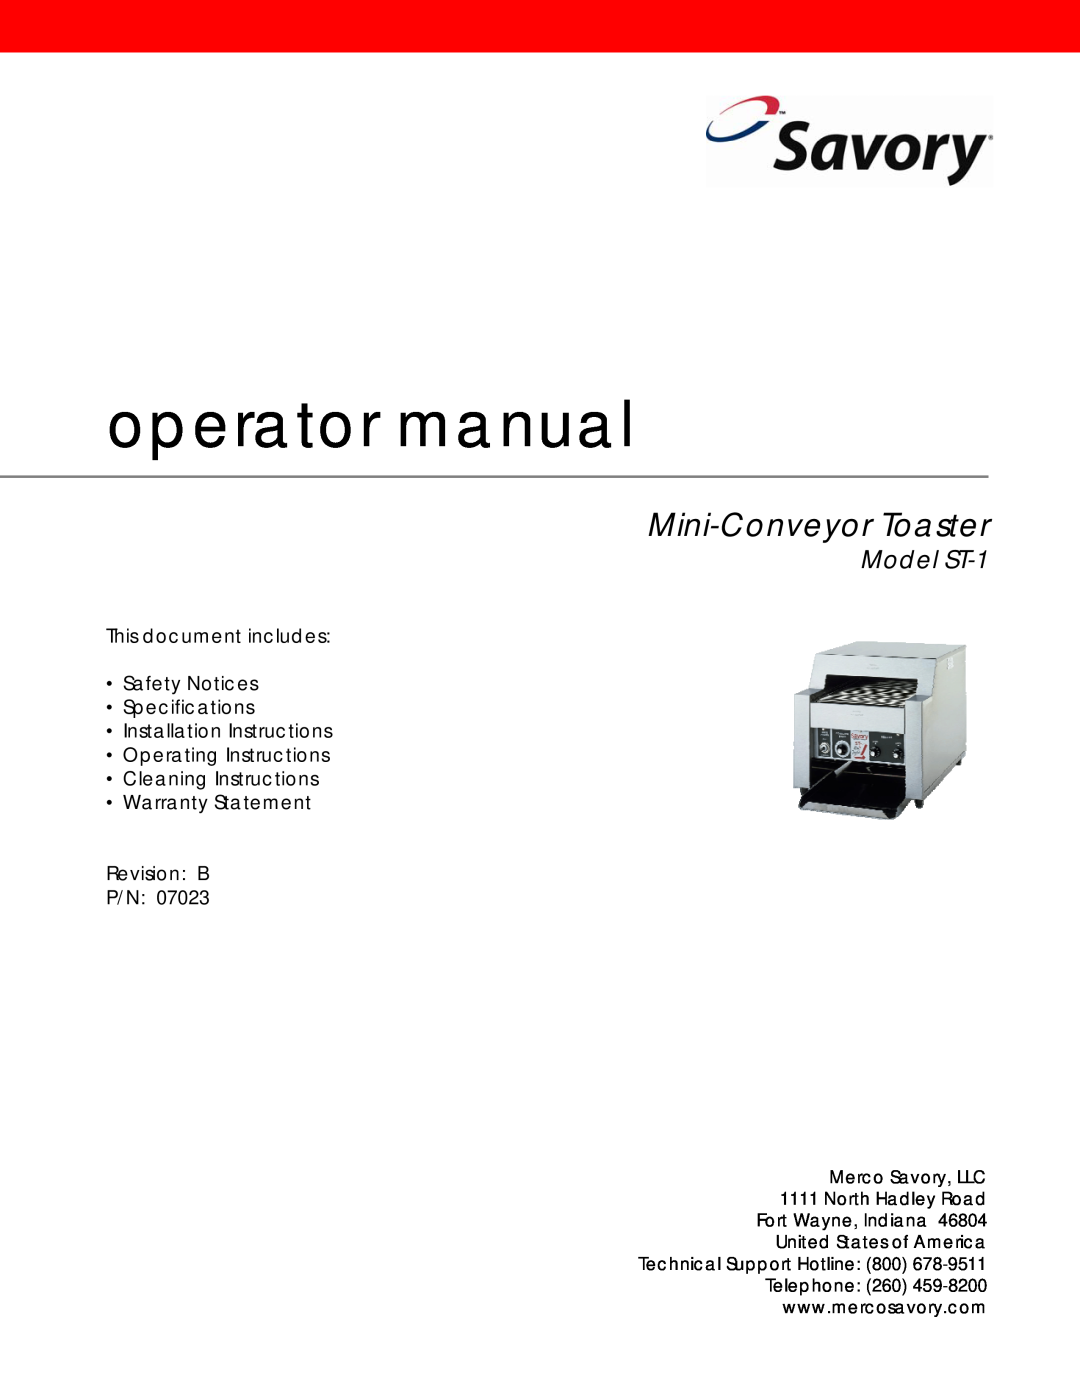 Lincoln specifications operator manual, Mini-ConveyorToaster, Model ST-1, This document includes Safety Notices 